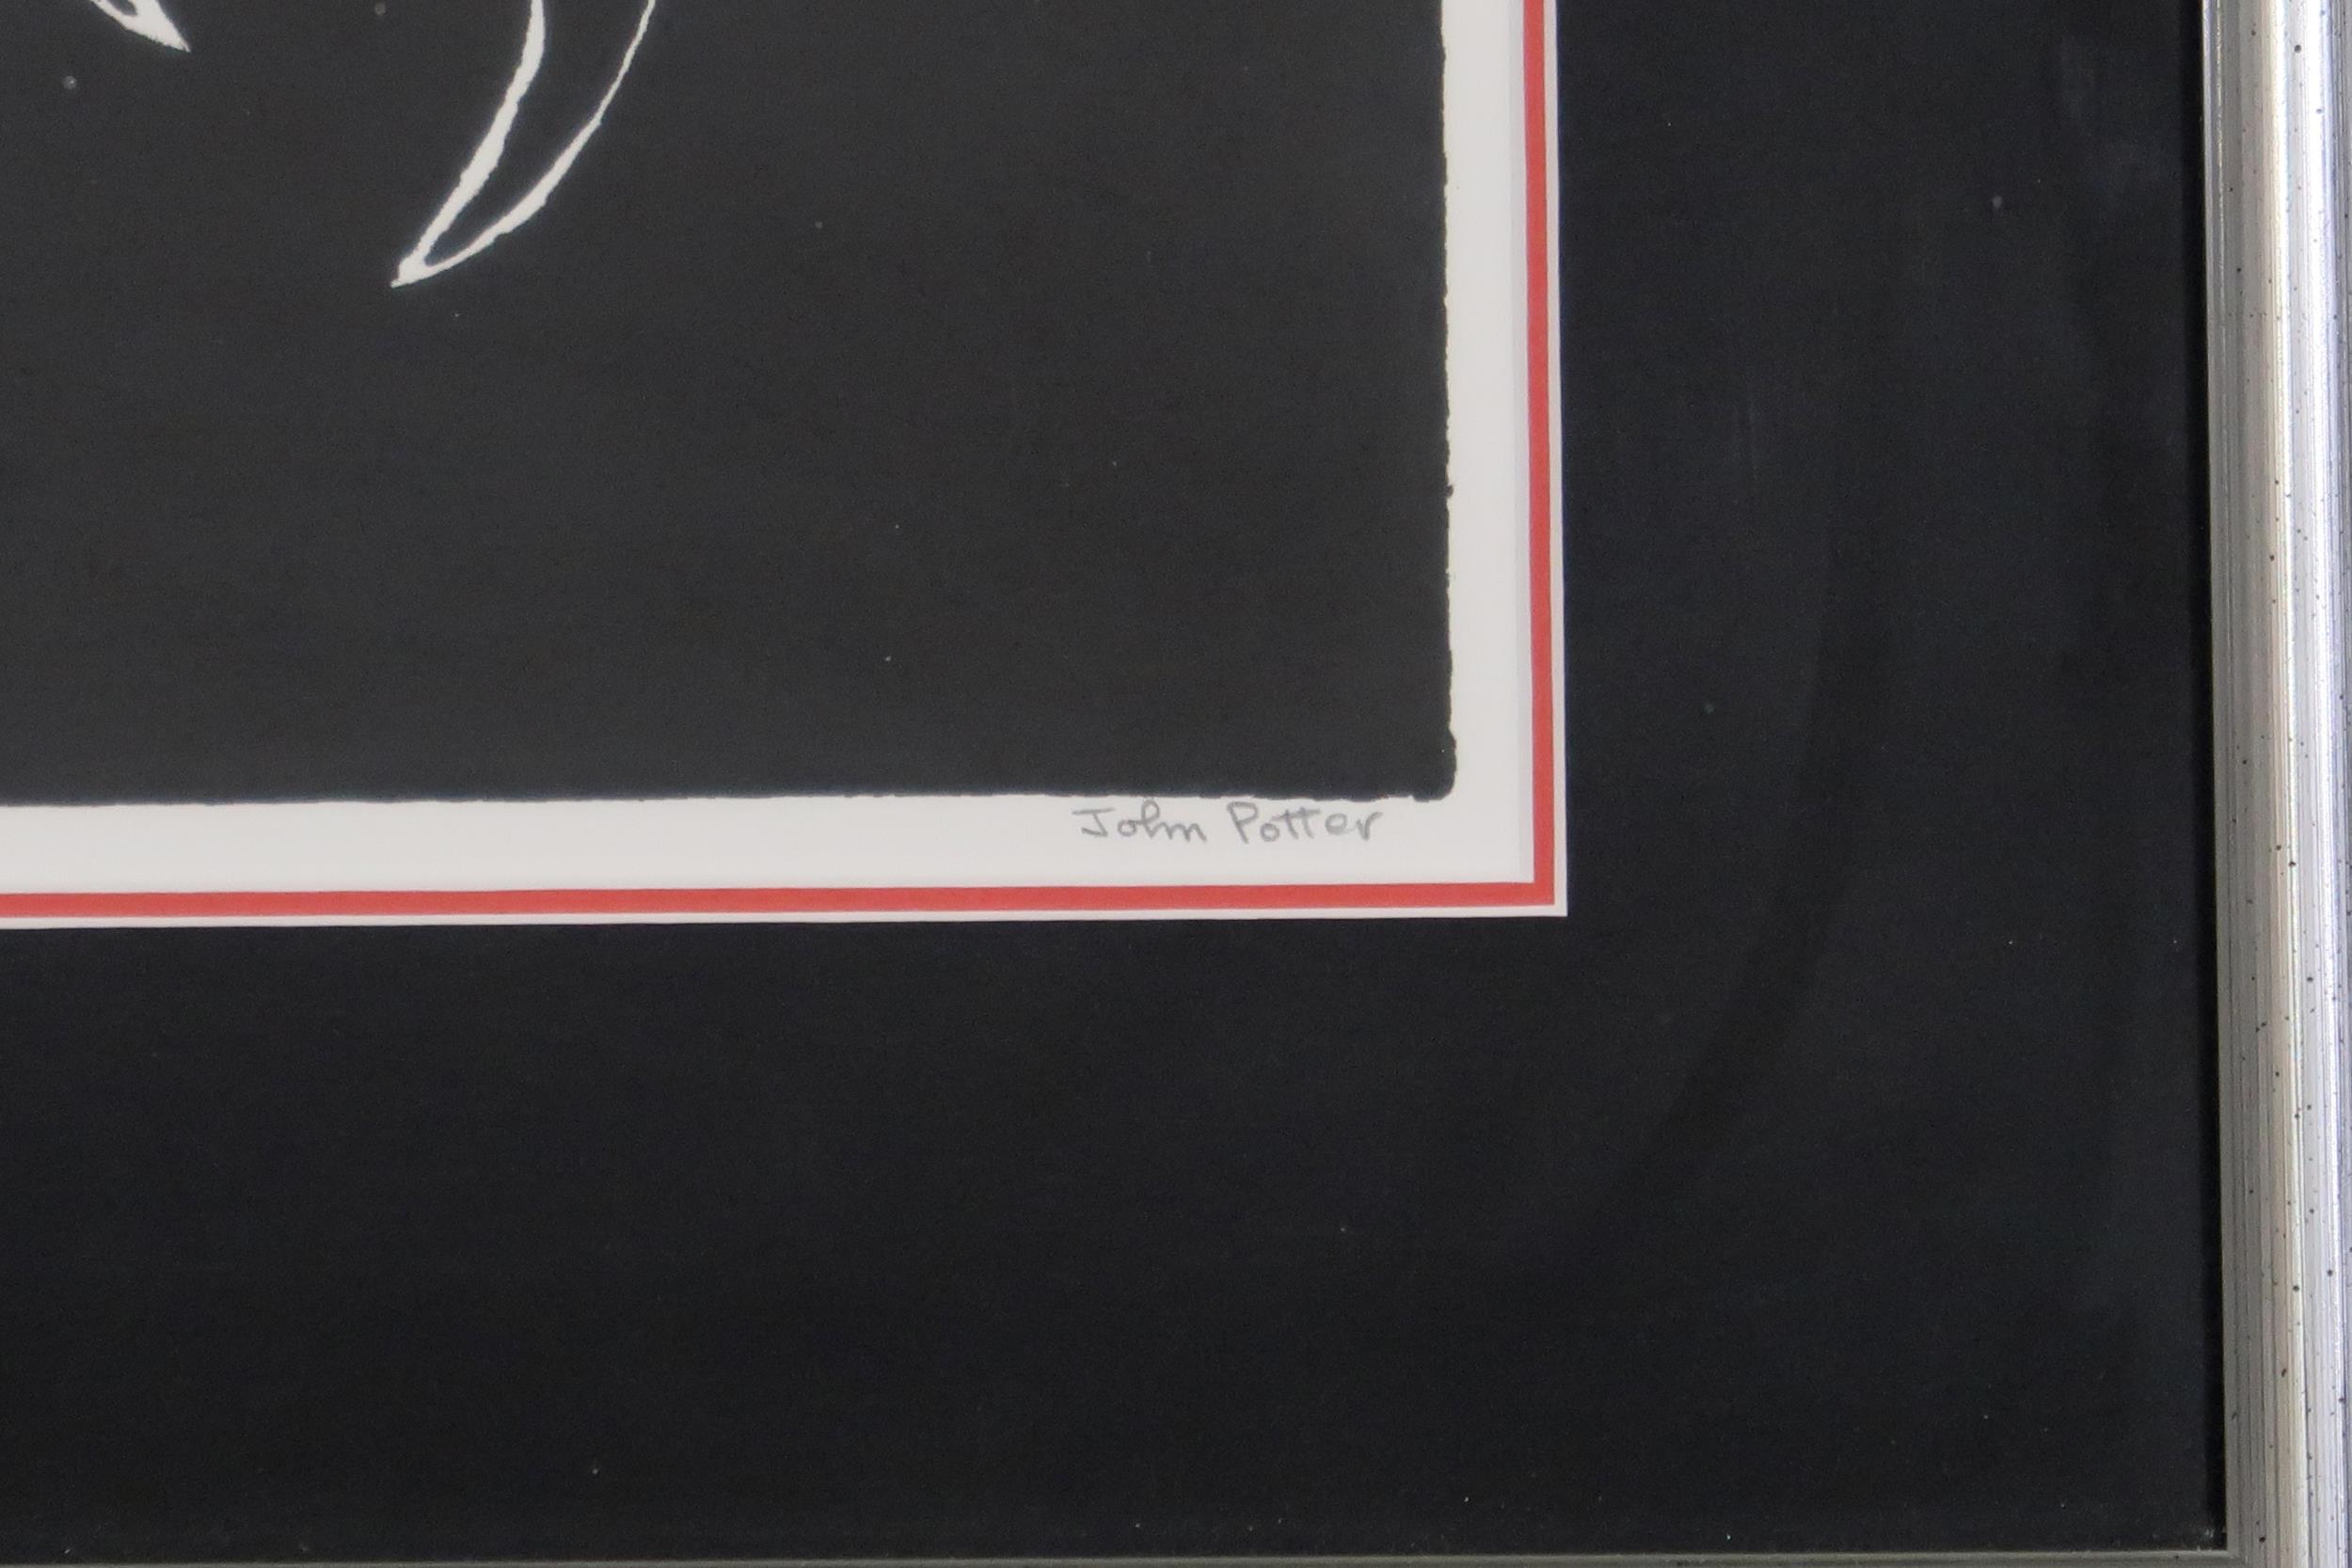 JOHN POTTER (CONTEMPORARY SCHOOL)  COCKEREL  Woodcut, signed lower right, numbered 15/100, 24 x 31cm - Image 3 of 3